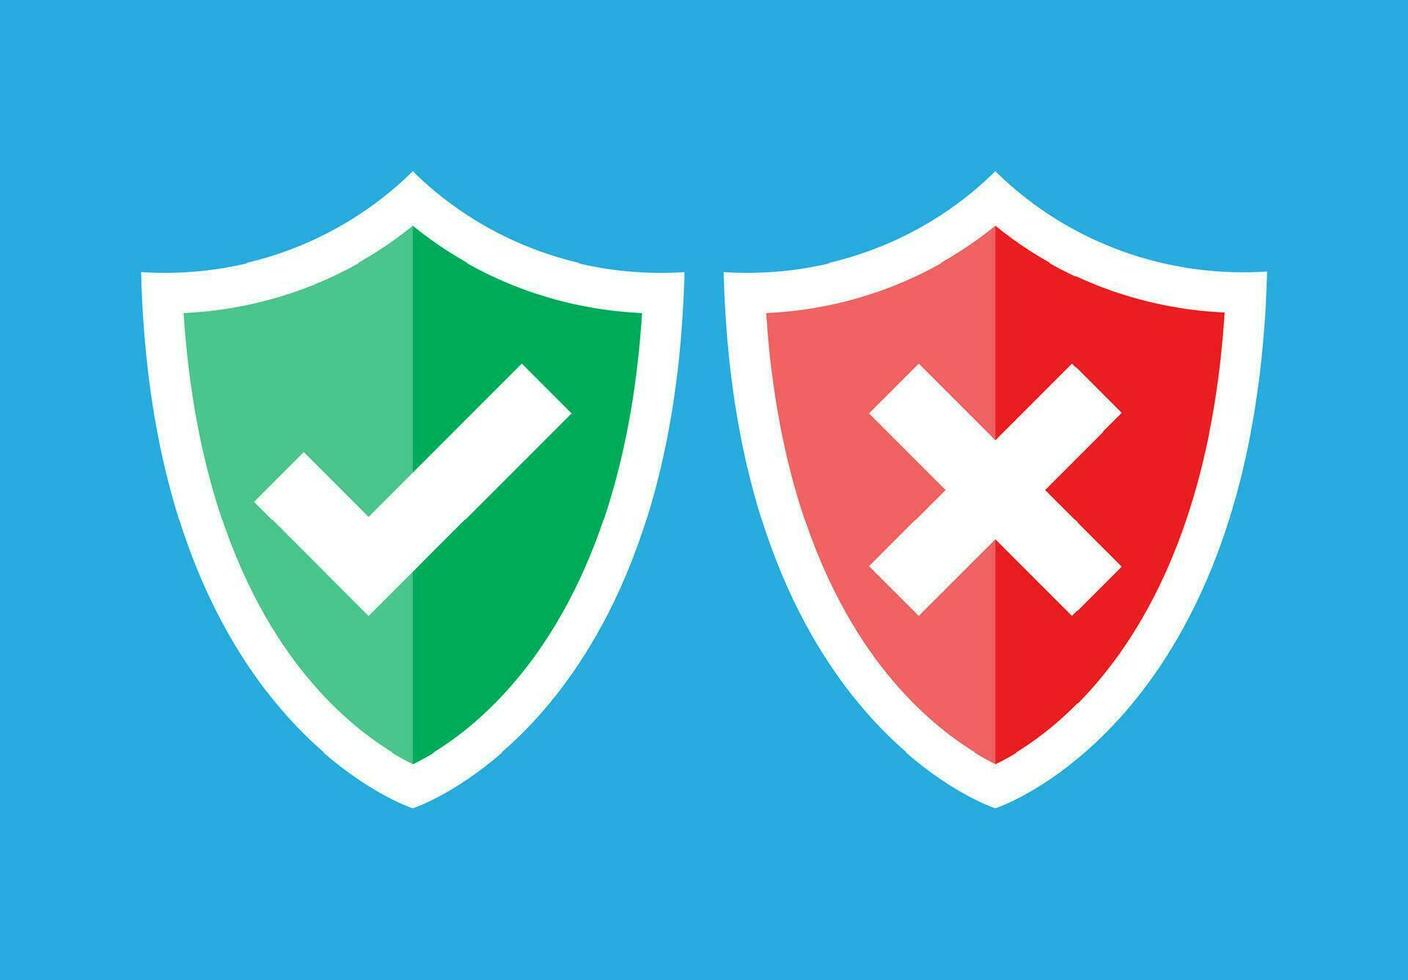 Shields and check marks. Approved and rejected. Red and green shield with checkmark and x mark. Protection, security, secure data. Confidential information, privacy. Vector illustration flat style